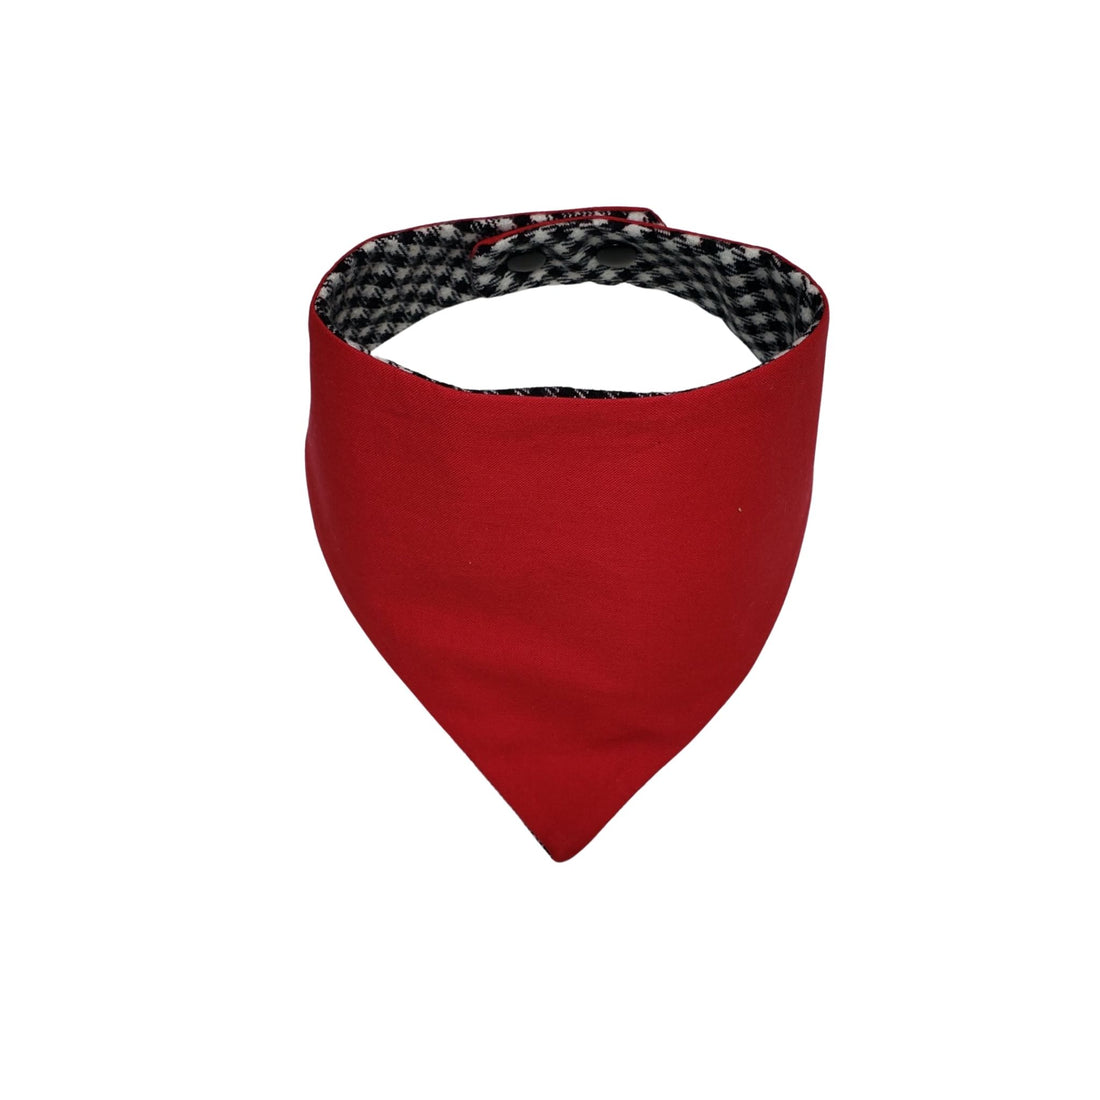 Red reversible black and white small check  dog bandana with snaps - Life Has Just Begun